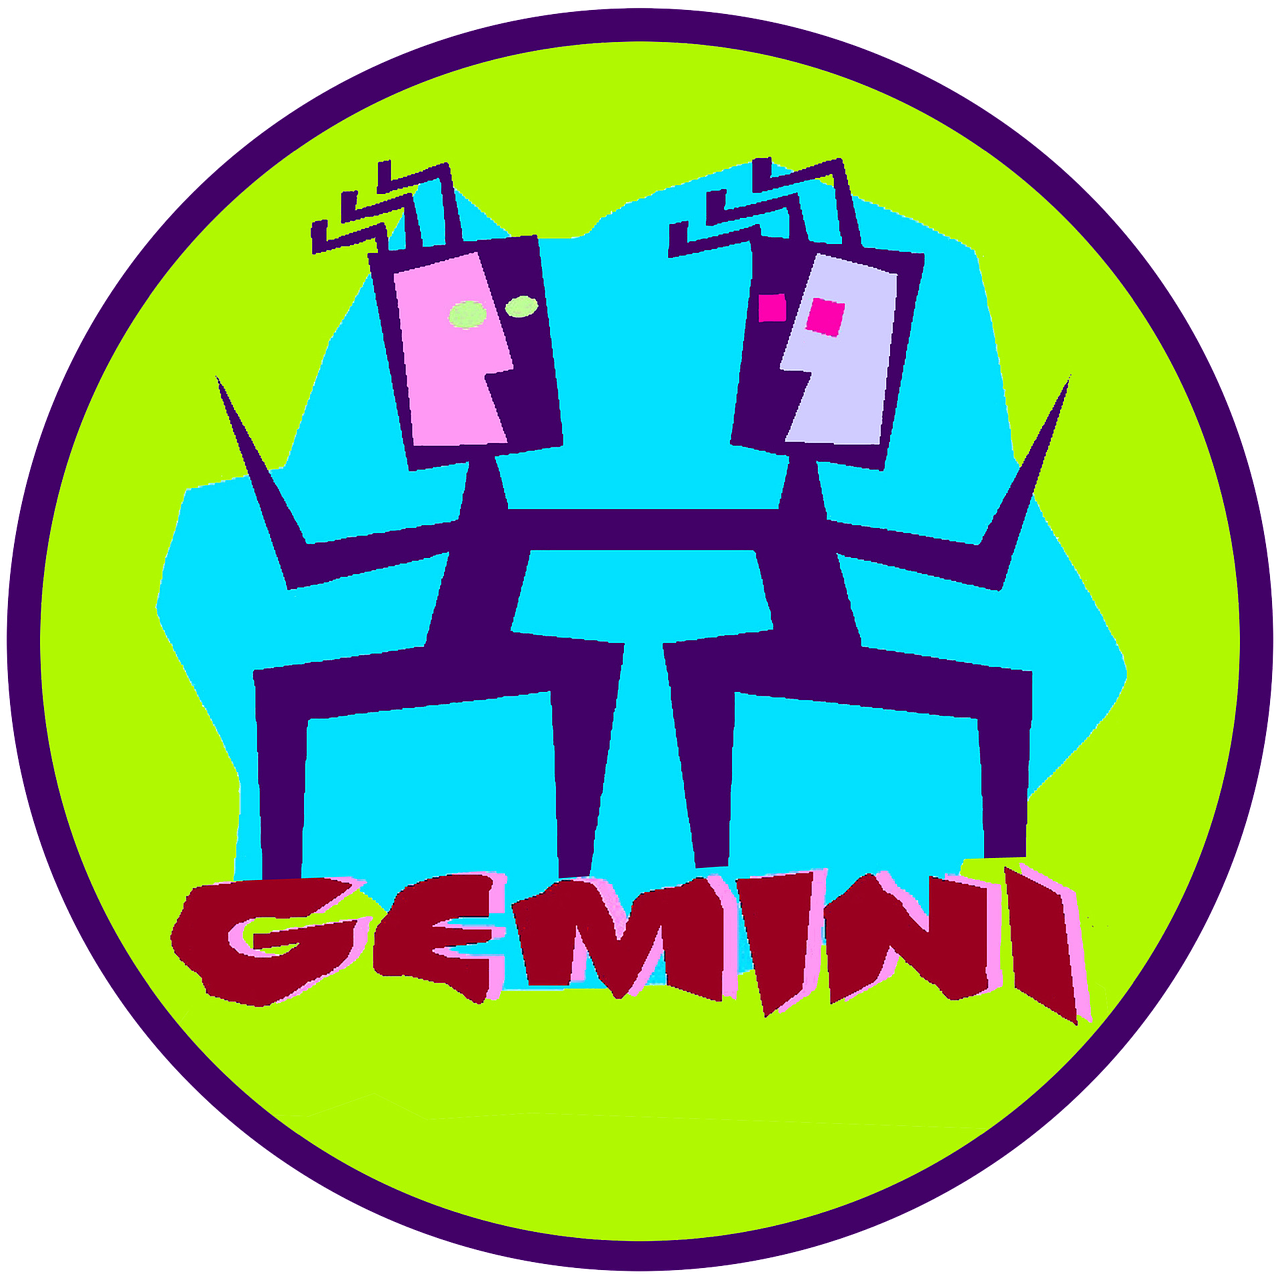 Download free photo of Gemini,astrology,zodiac,horoscope,sign from